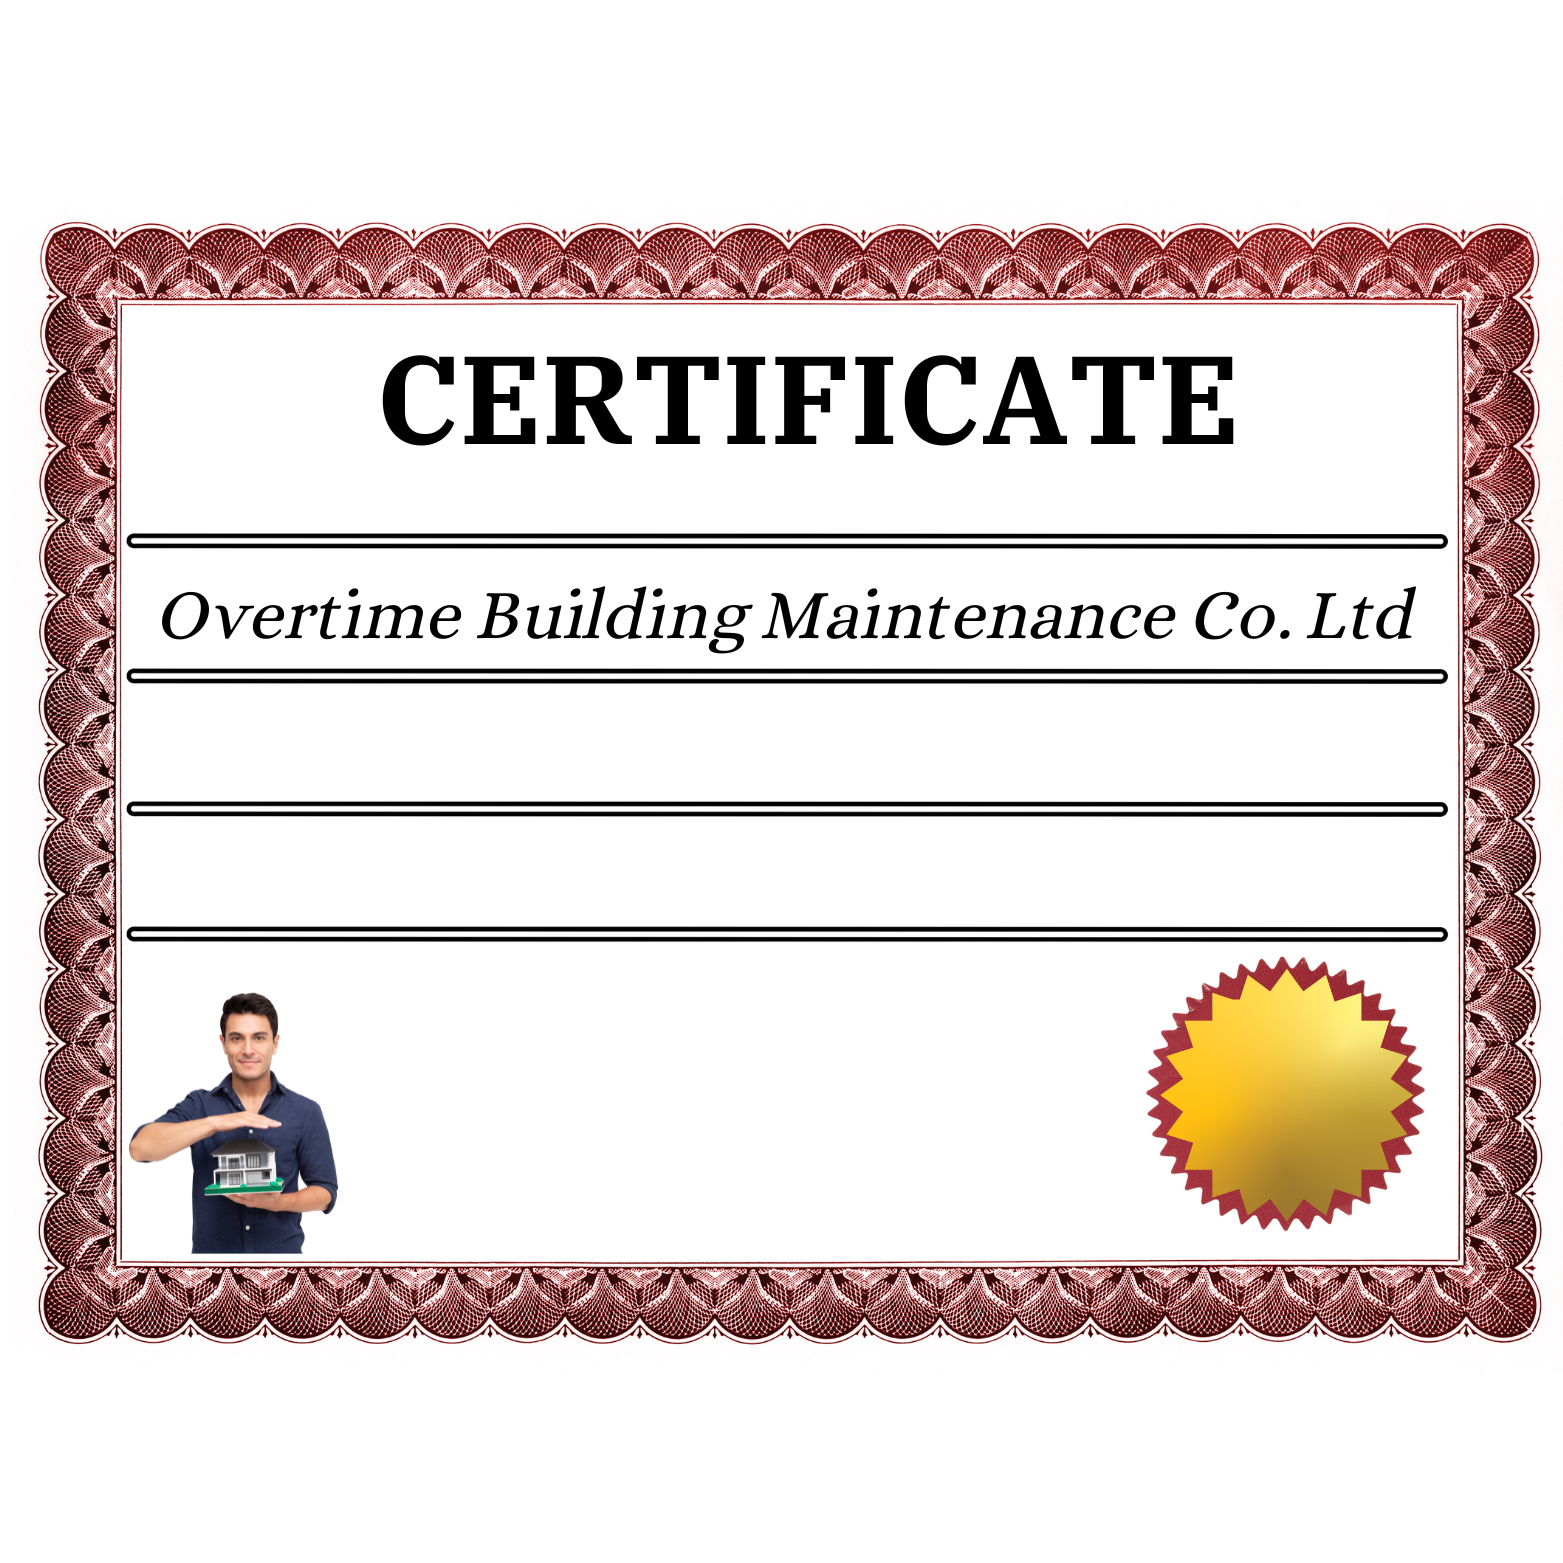 Building Maintenance Certificates: Everything You Need to Know